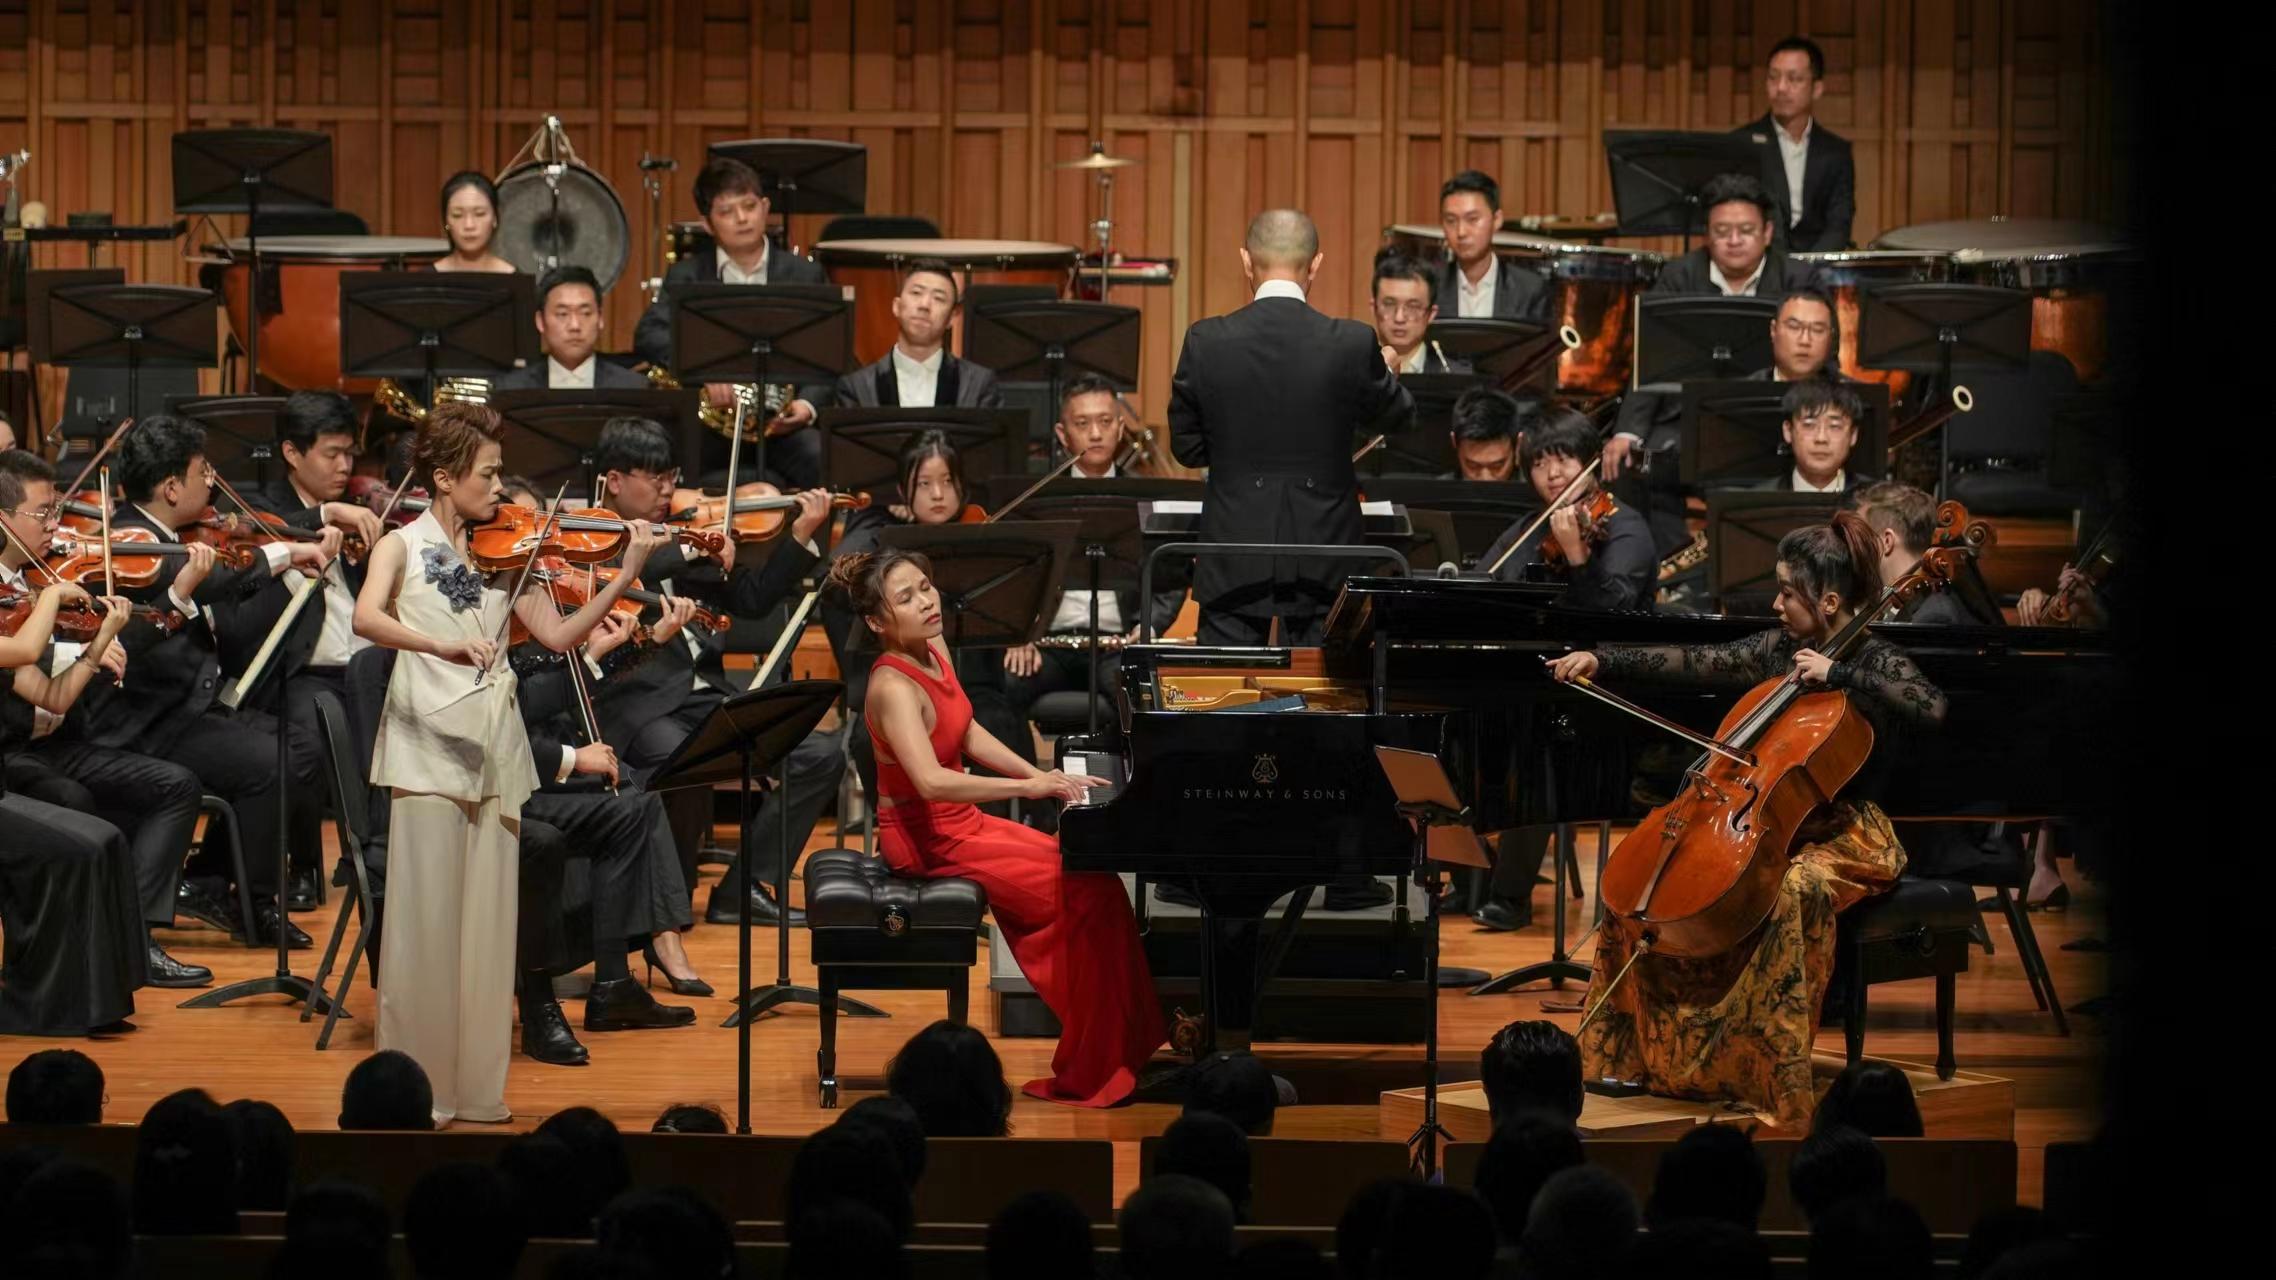 Hong Kong's Ambassador for Cultural Promotion Tan Dun invited young violinist Nina Wong, cellist Jia Nan and pianist Rachel Cheung to perform at the "From Beethoven to The First Emperor" concert in Xi'an in July. Photo shows the "From Beethoven to The First Emperor" concert. 